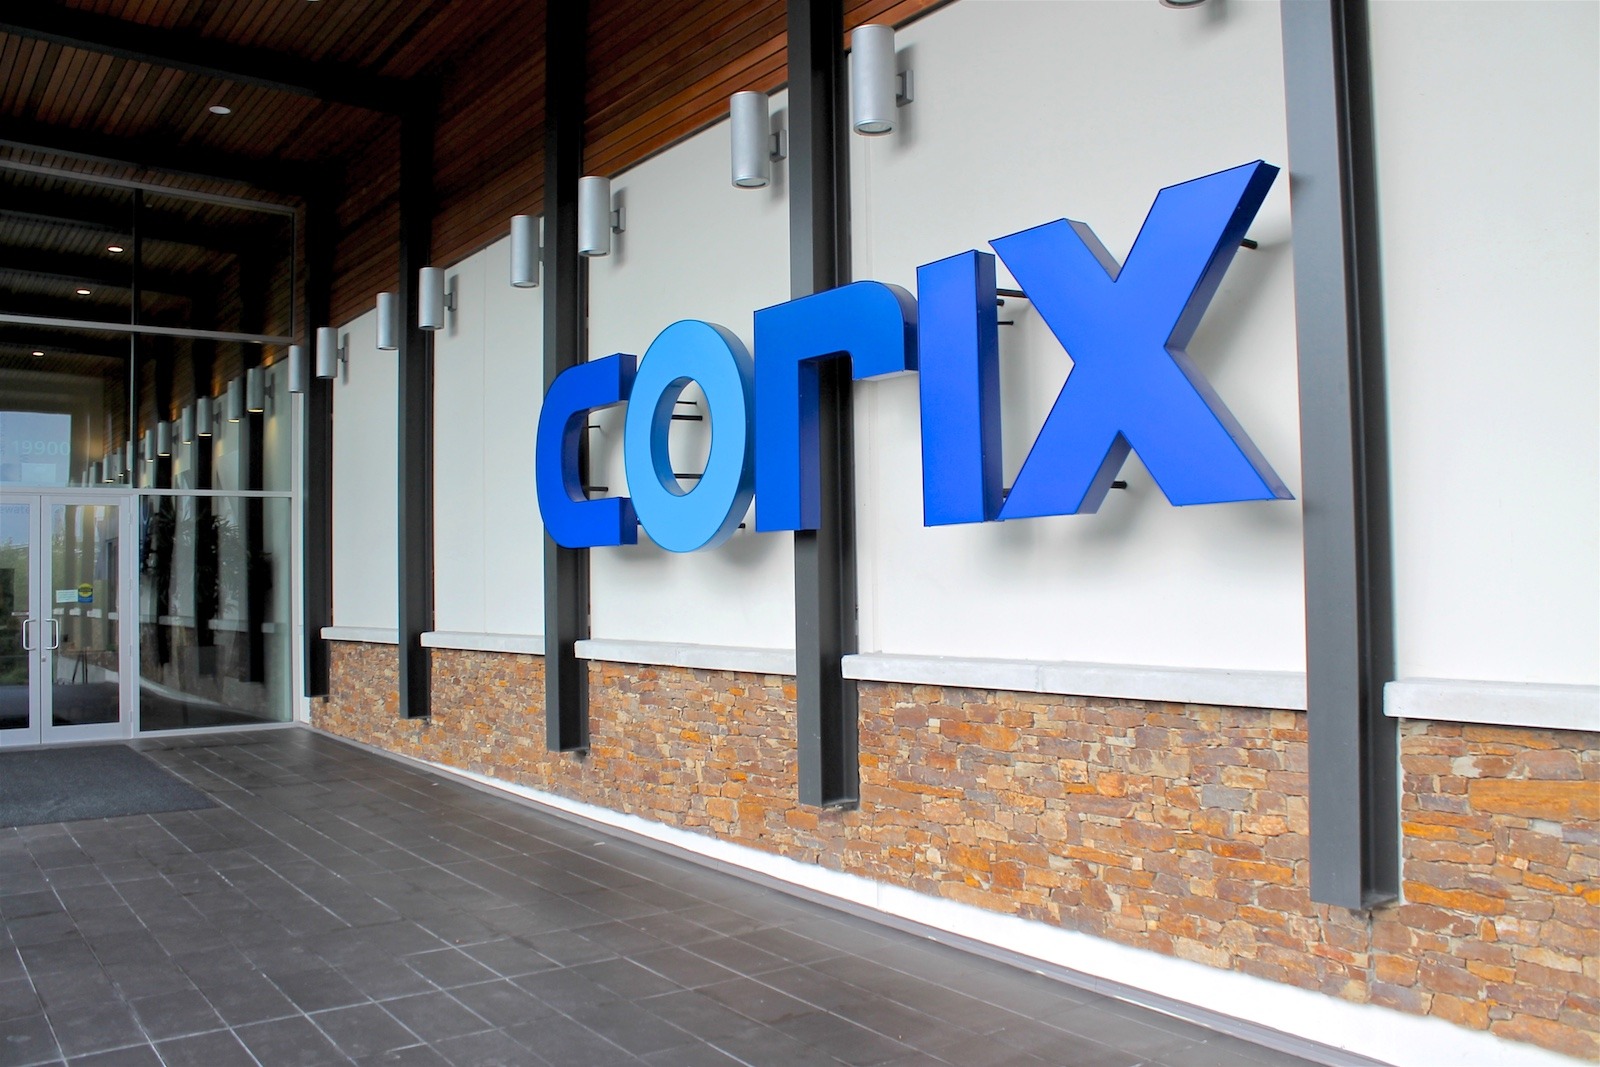 Robertson-Walls-Ceilings-Completed-Projects-Office-Interiors-Corix-Water-Products-1 CORIX WATER PRODUCTS HEAD OFFICE